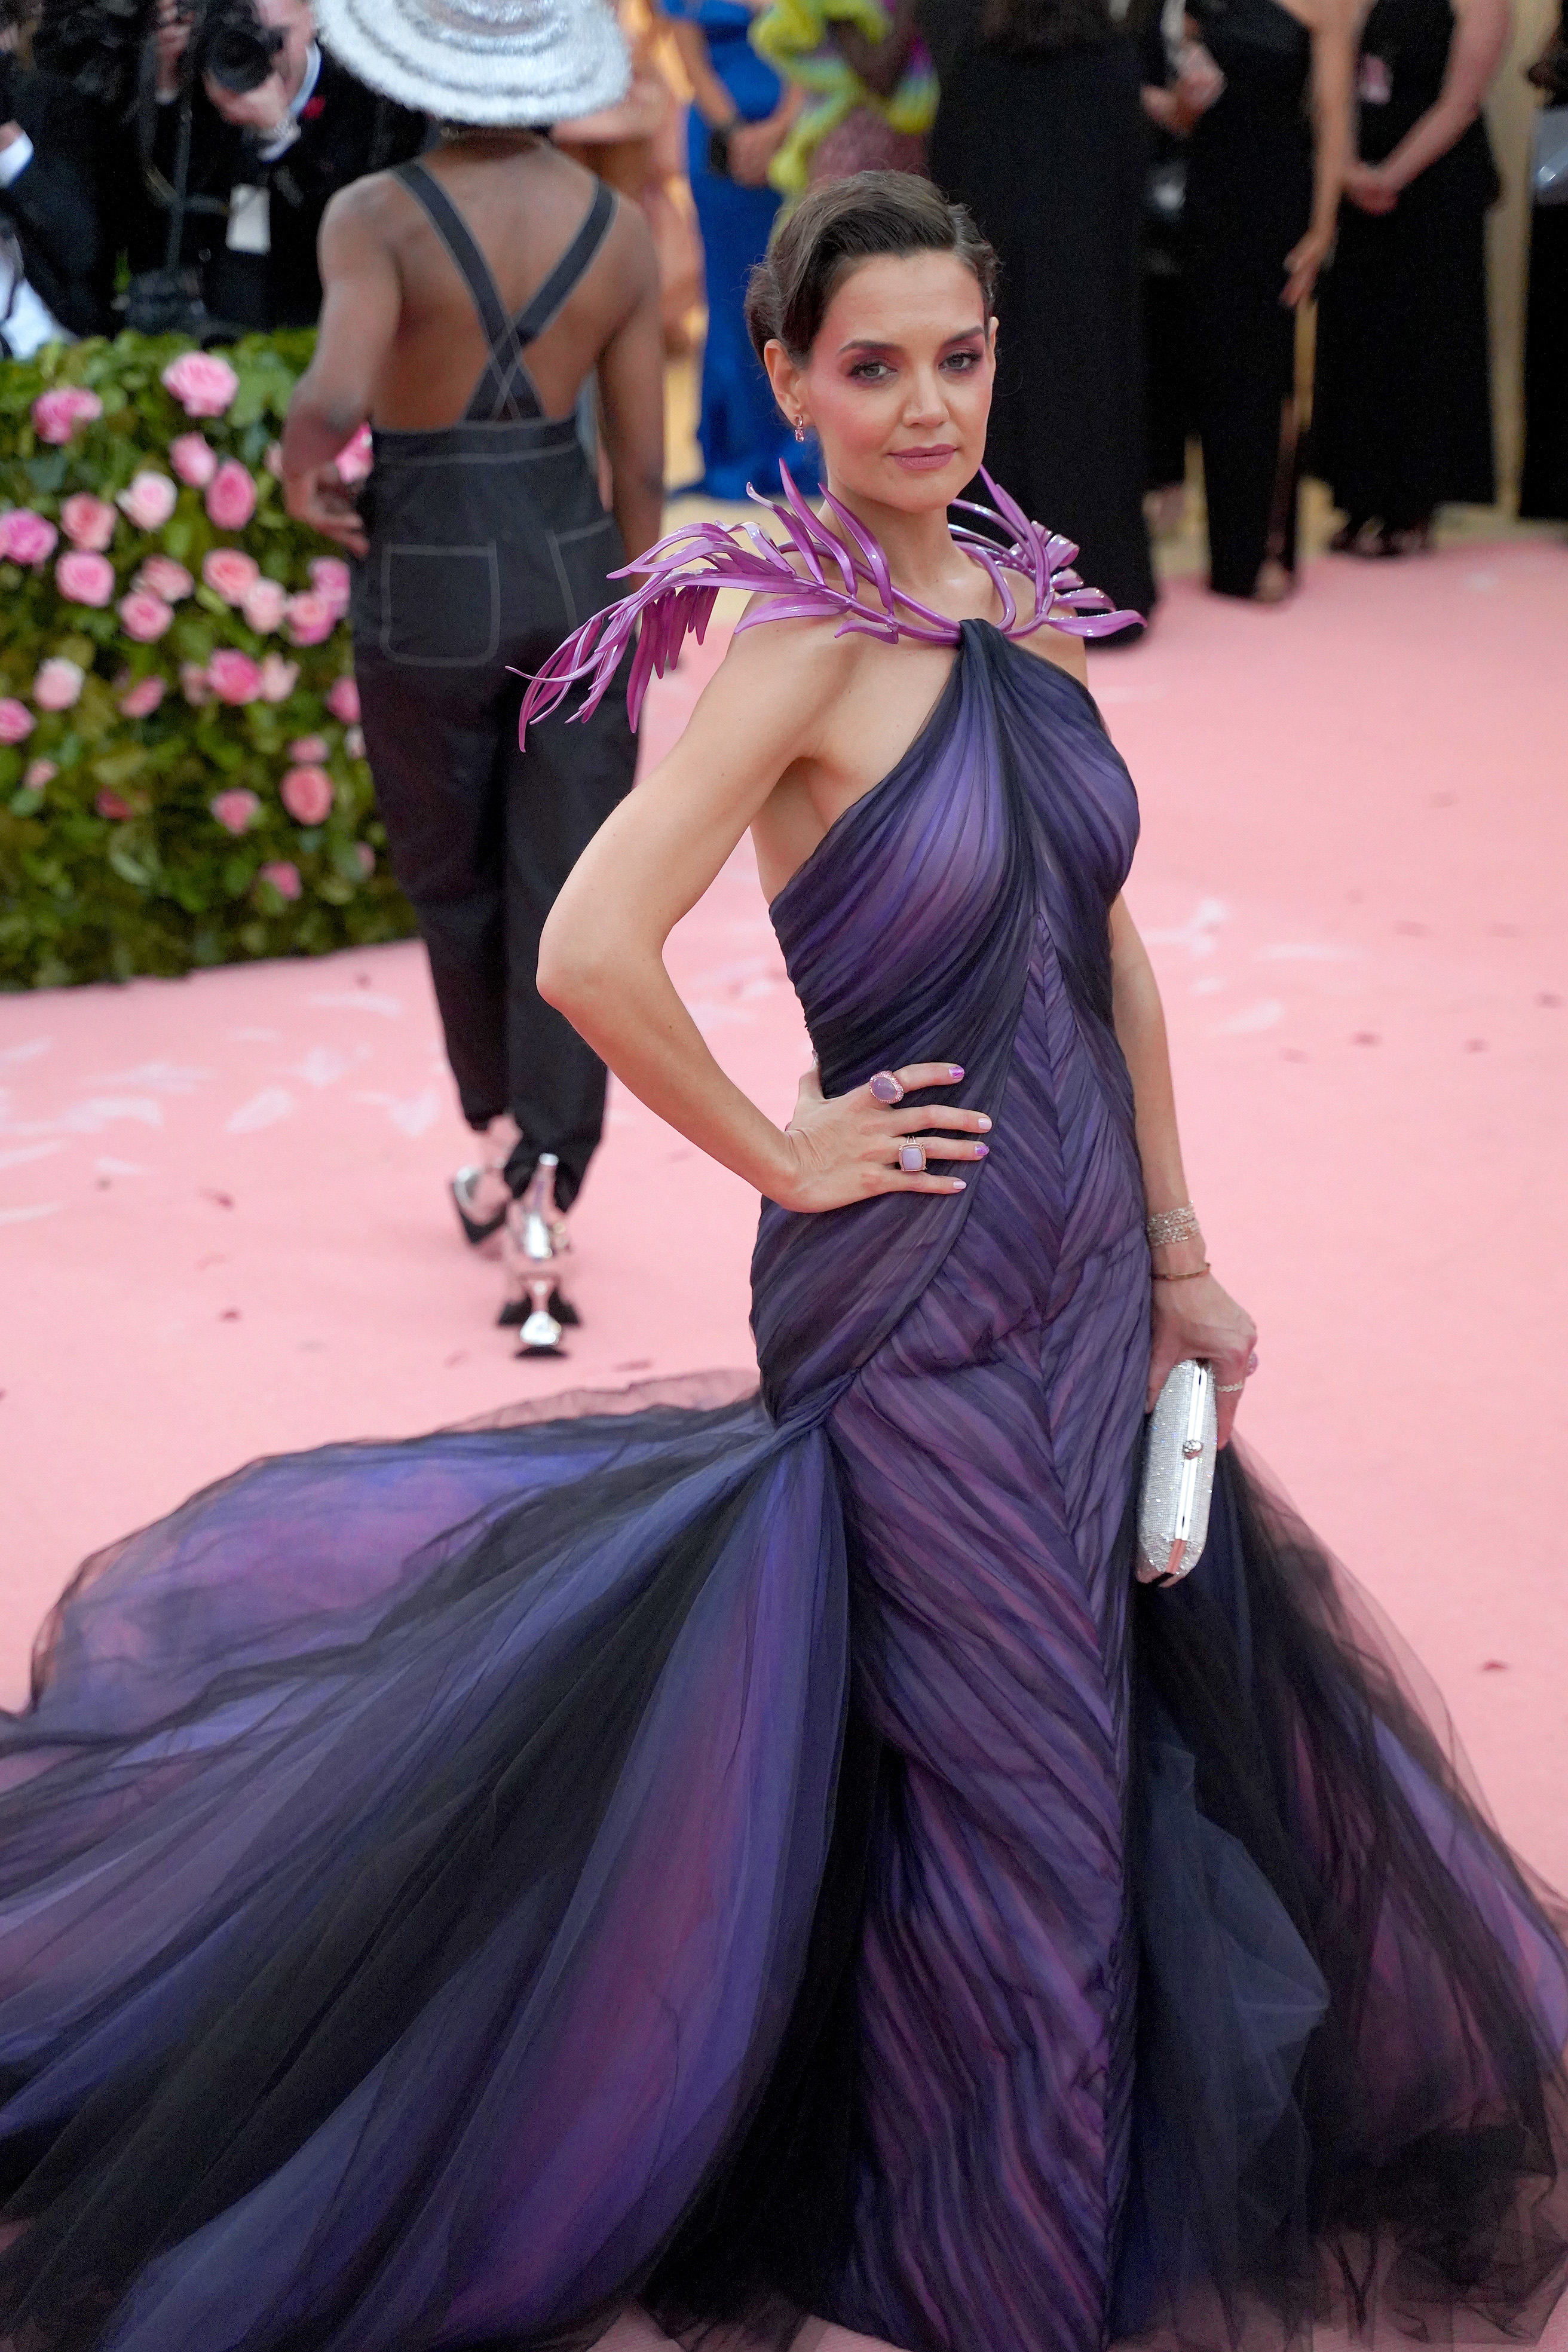 Woman in a purple gown with feather shoulder accents at a gala event